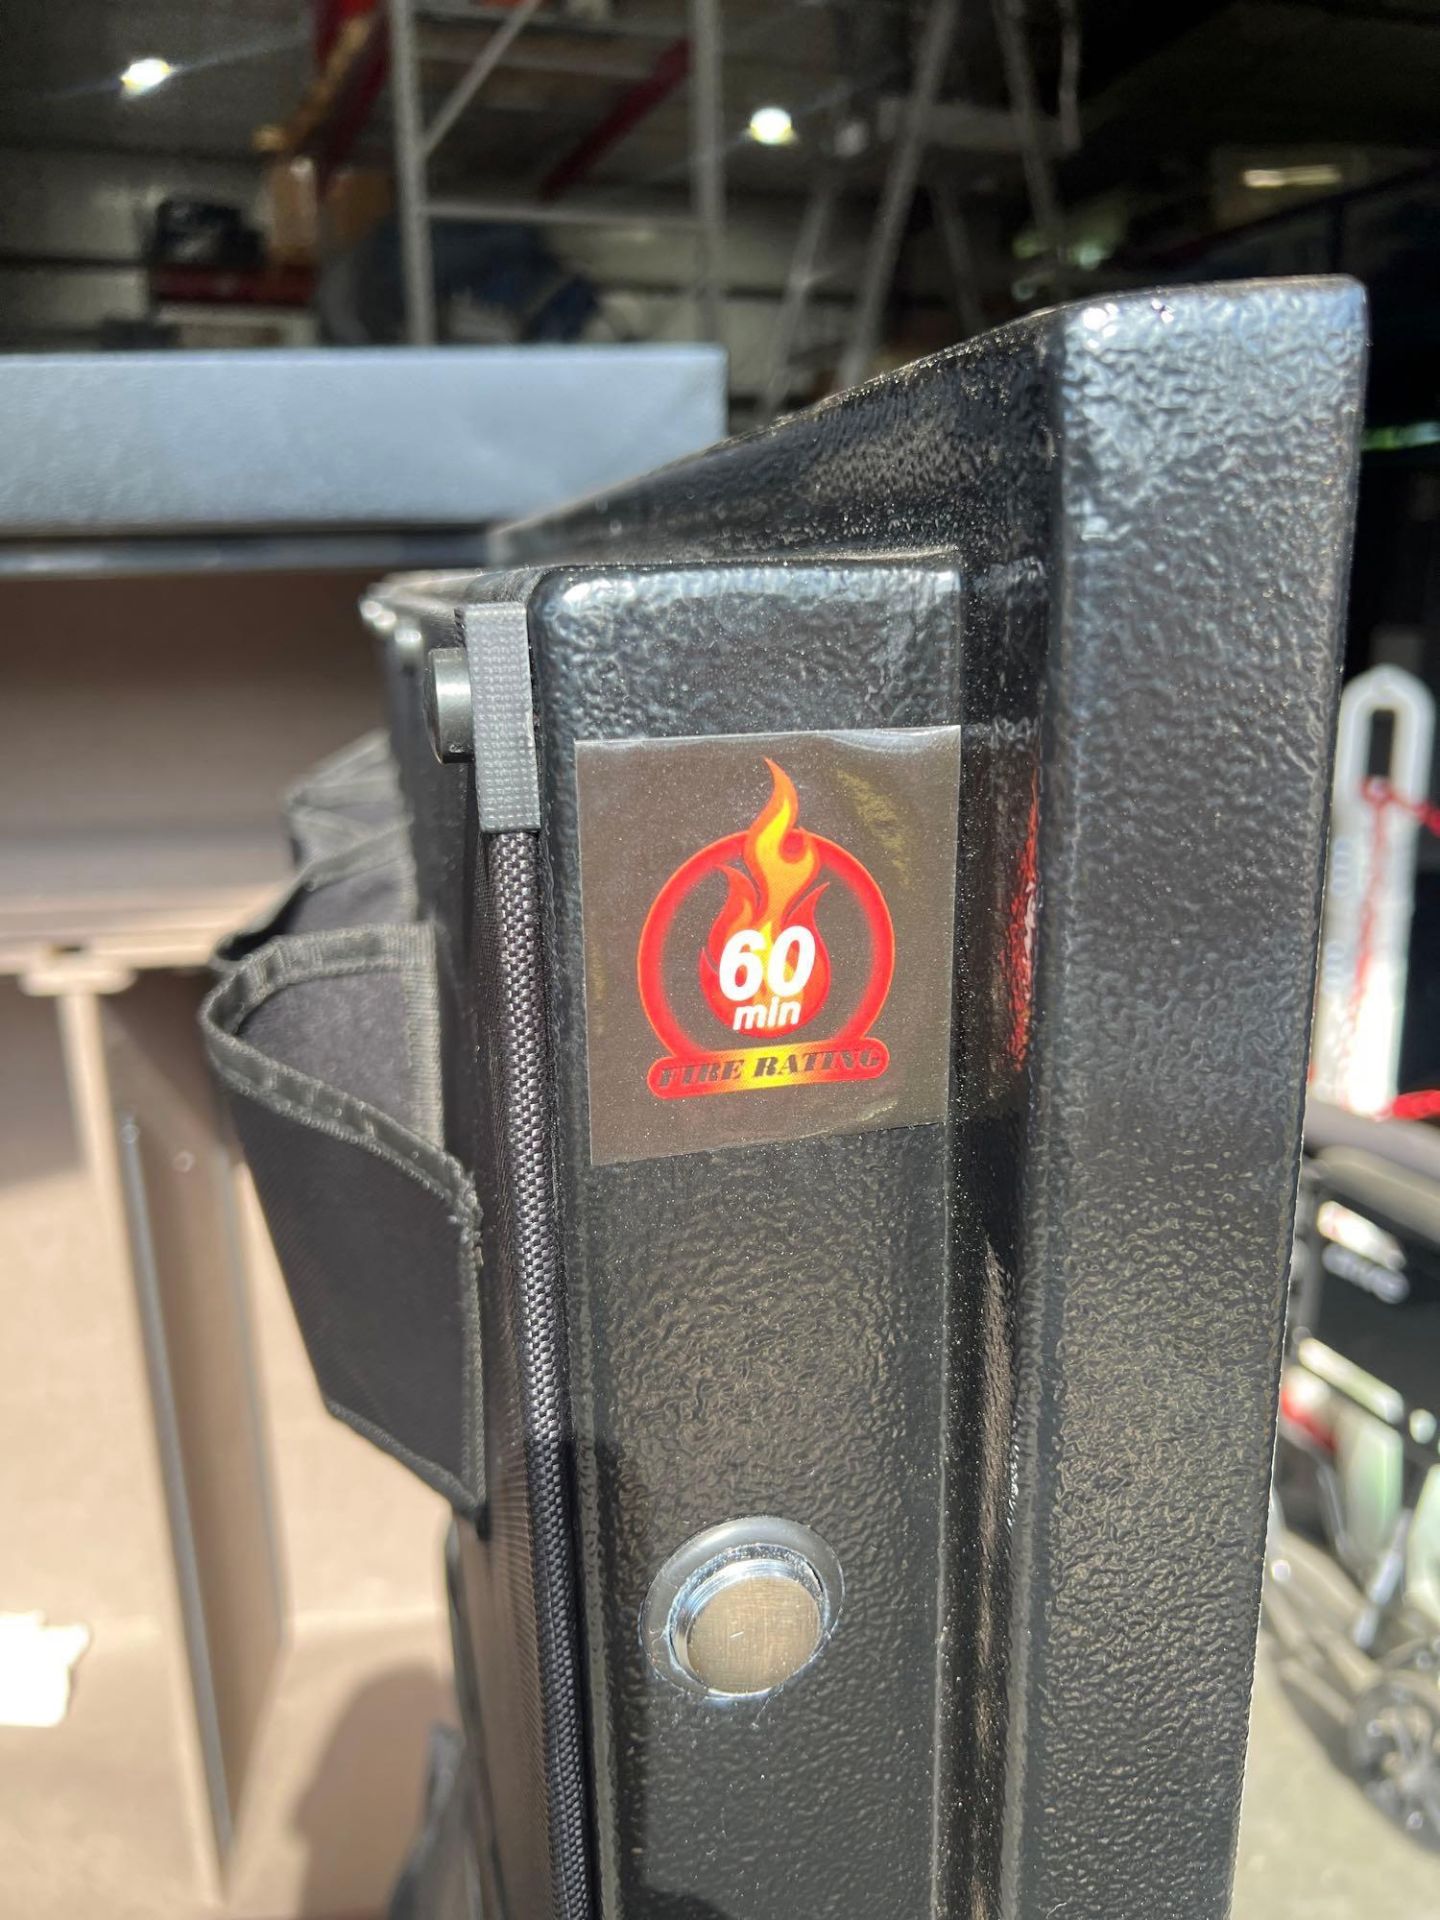 UNUSED 64-GUN FIRE PROOF SAFE, ELECTRONIC ENTRY/NUMBER PAD - Image 7 of 7